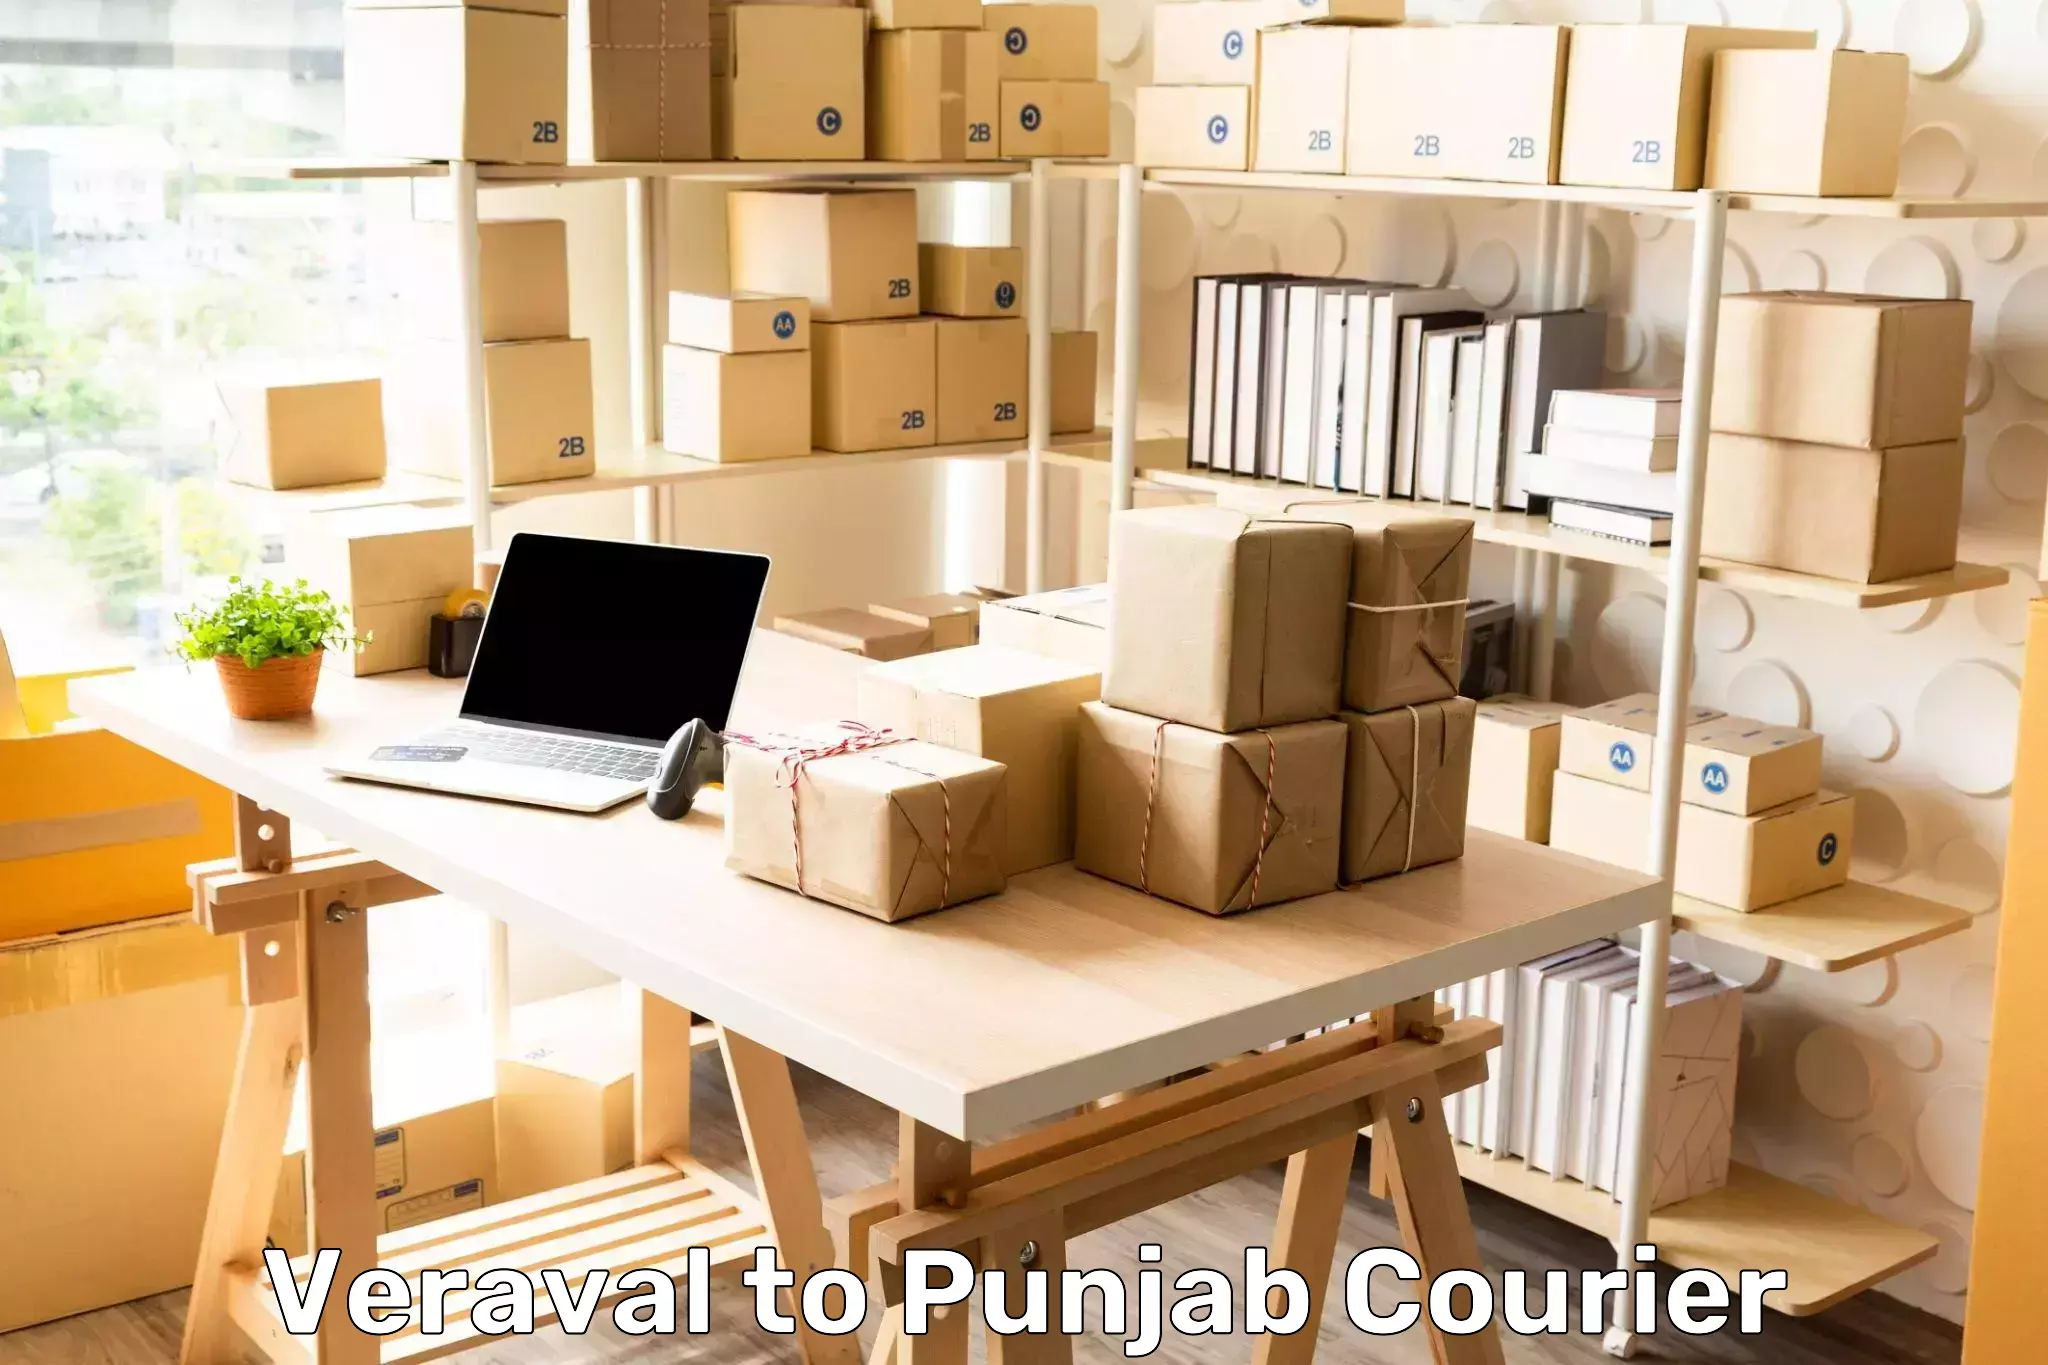 Full-service courier options Veraval to Dera Bassi